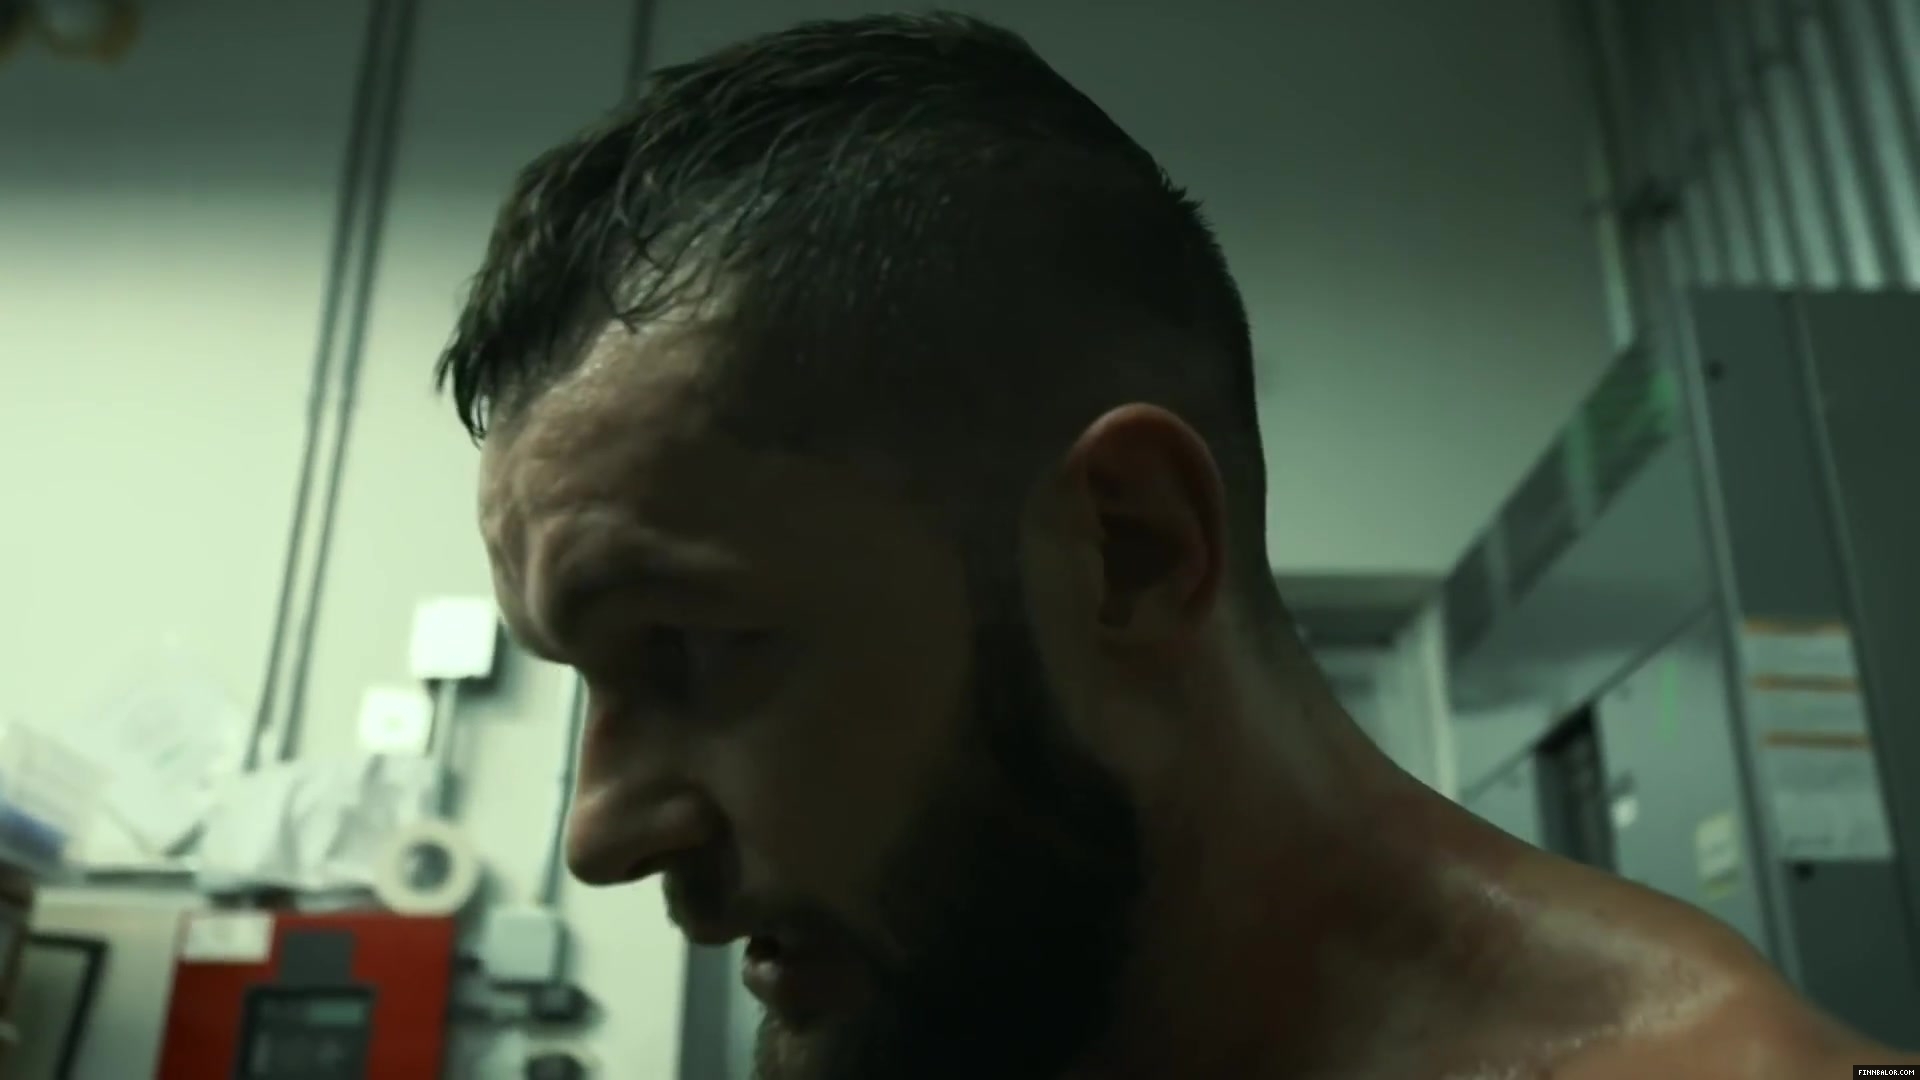 Finn_Balor___The_Rising_of_the_Prince_in_NXT_250.jpg